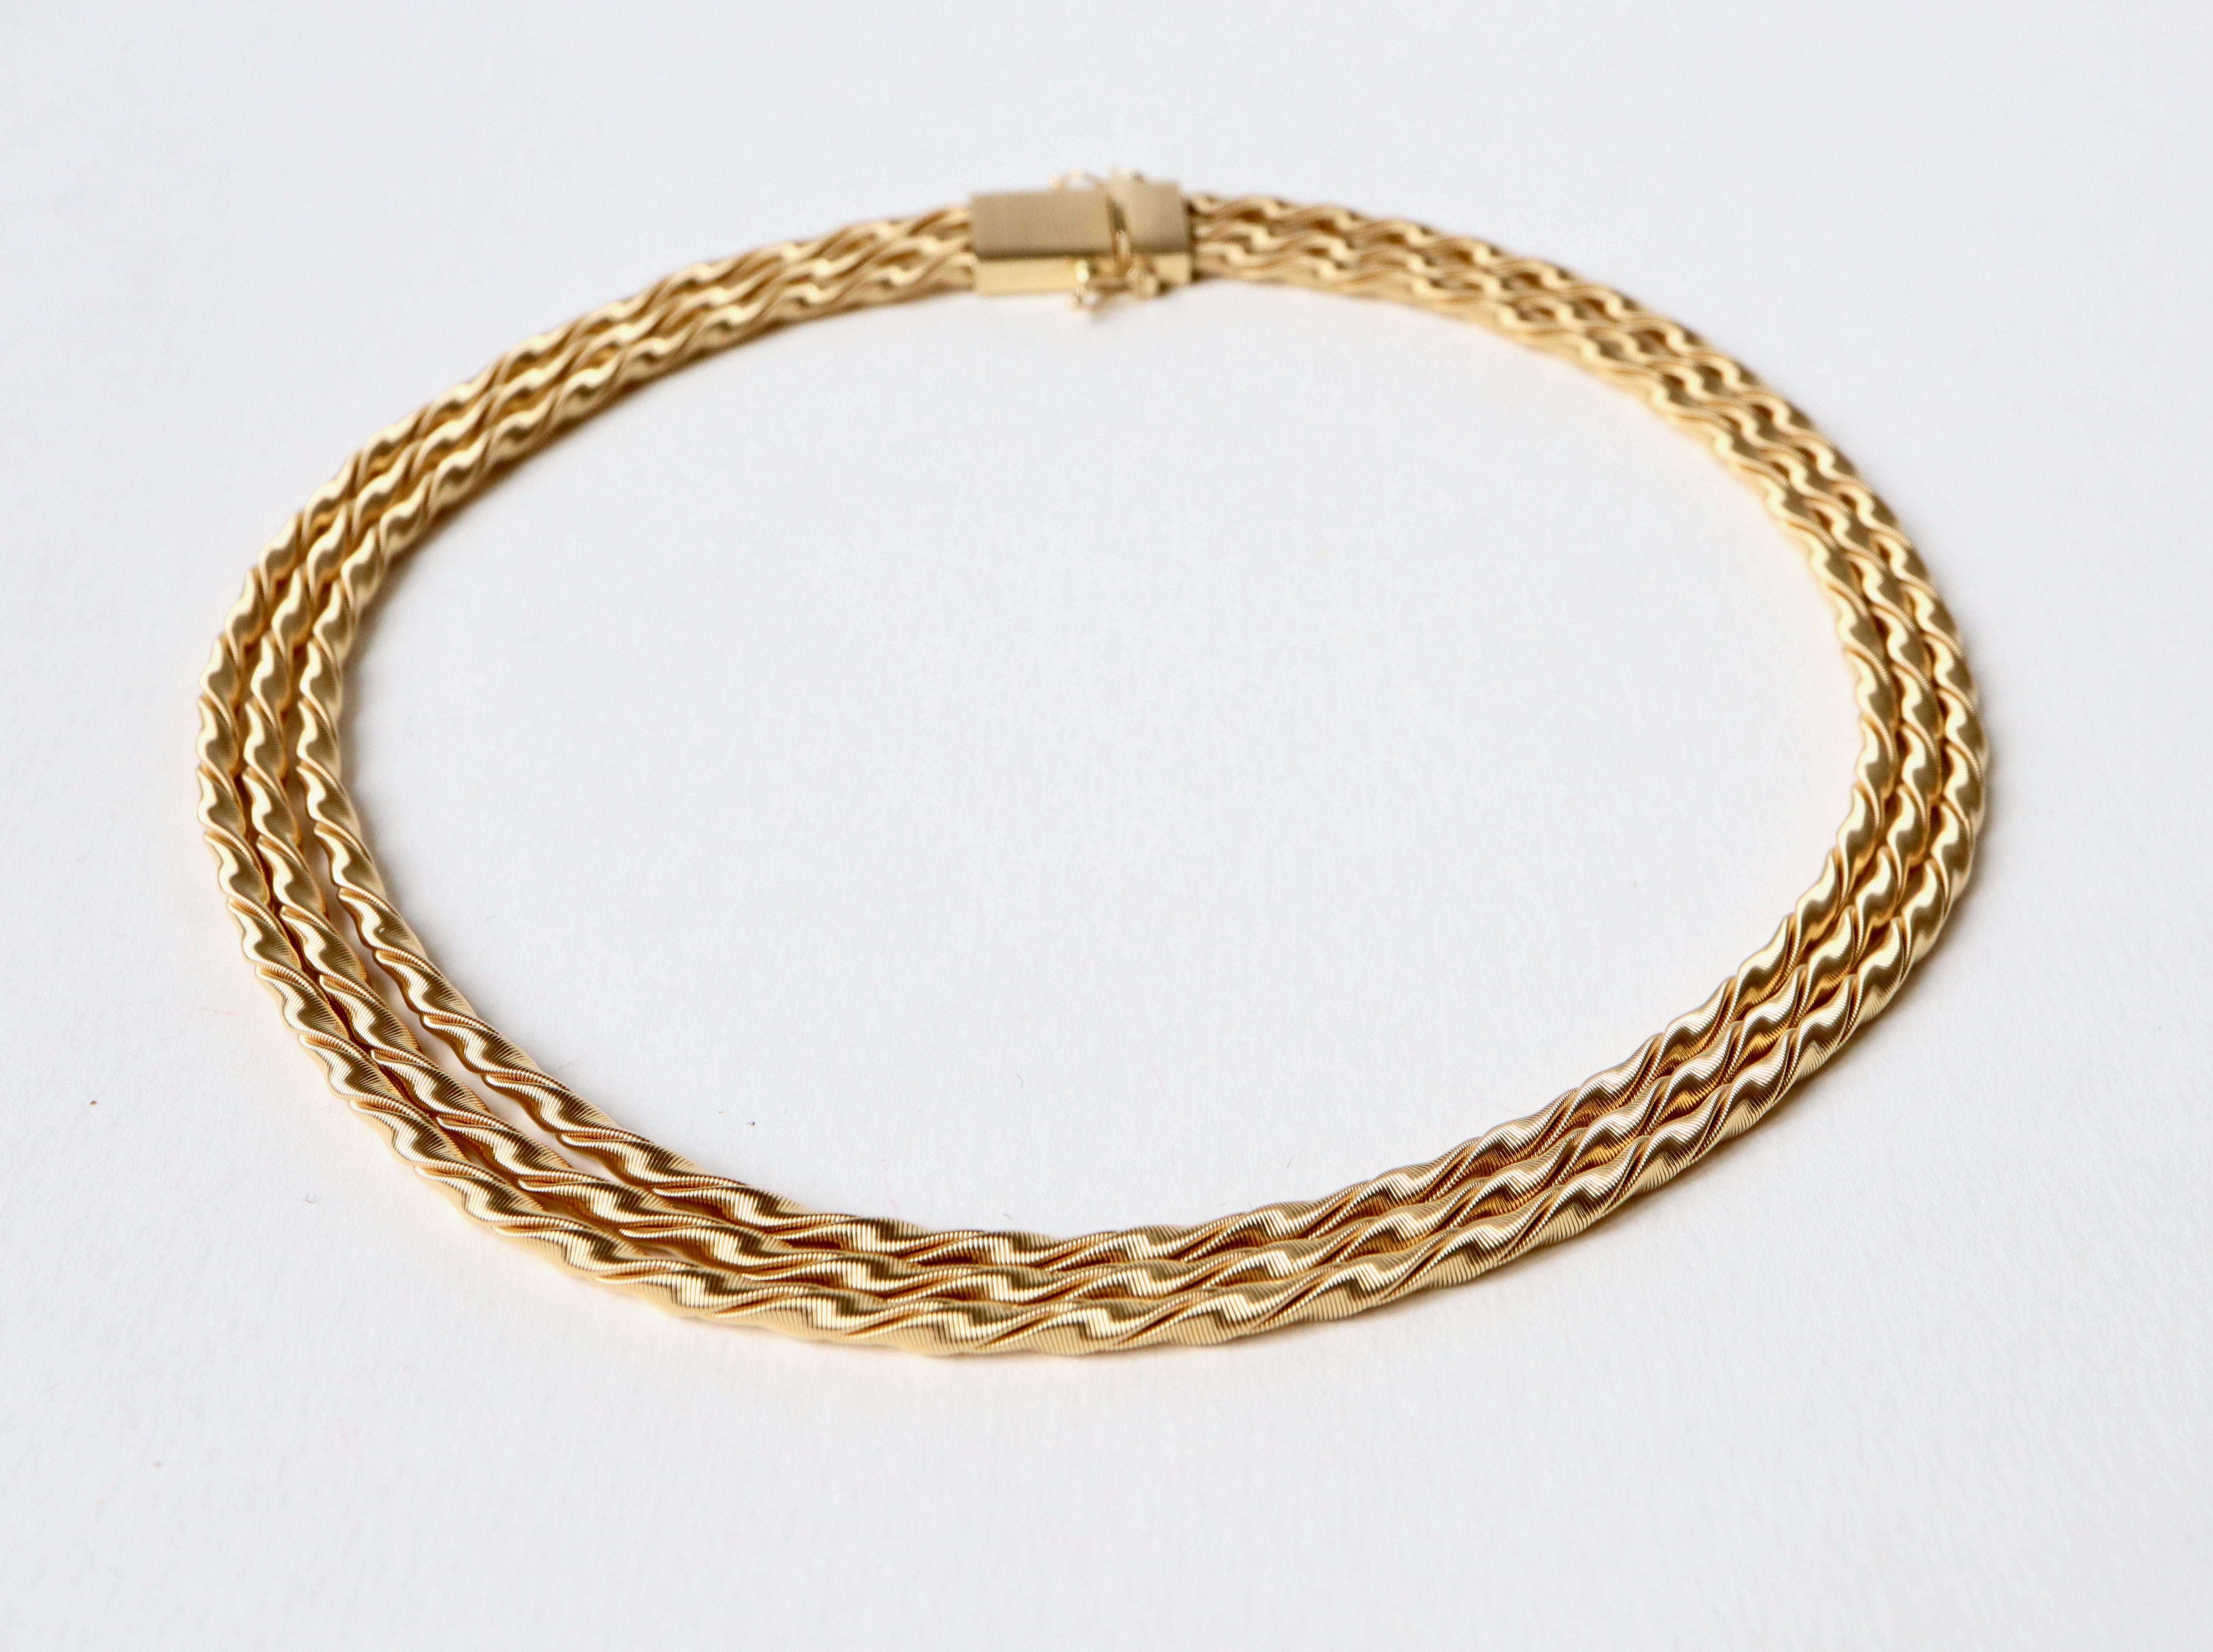 Necklace with 3 important twisted cords in 18 kt yellow gold
2 security Eights
Net weight: 82 g 
Eagle Head Hallmark
Length 44 cm 